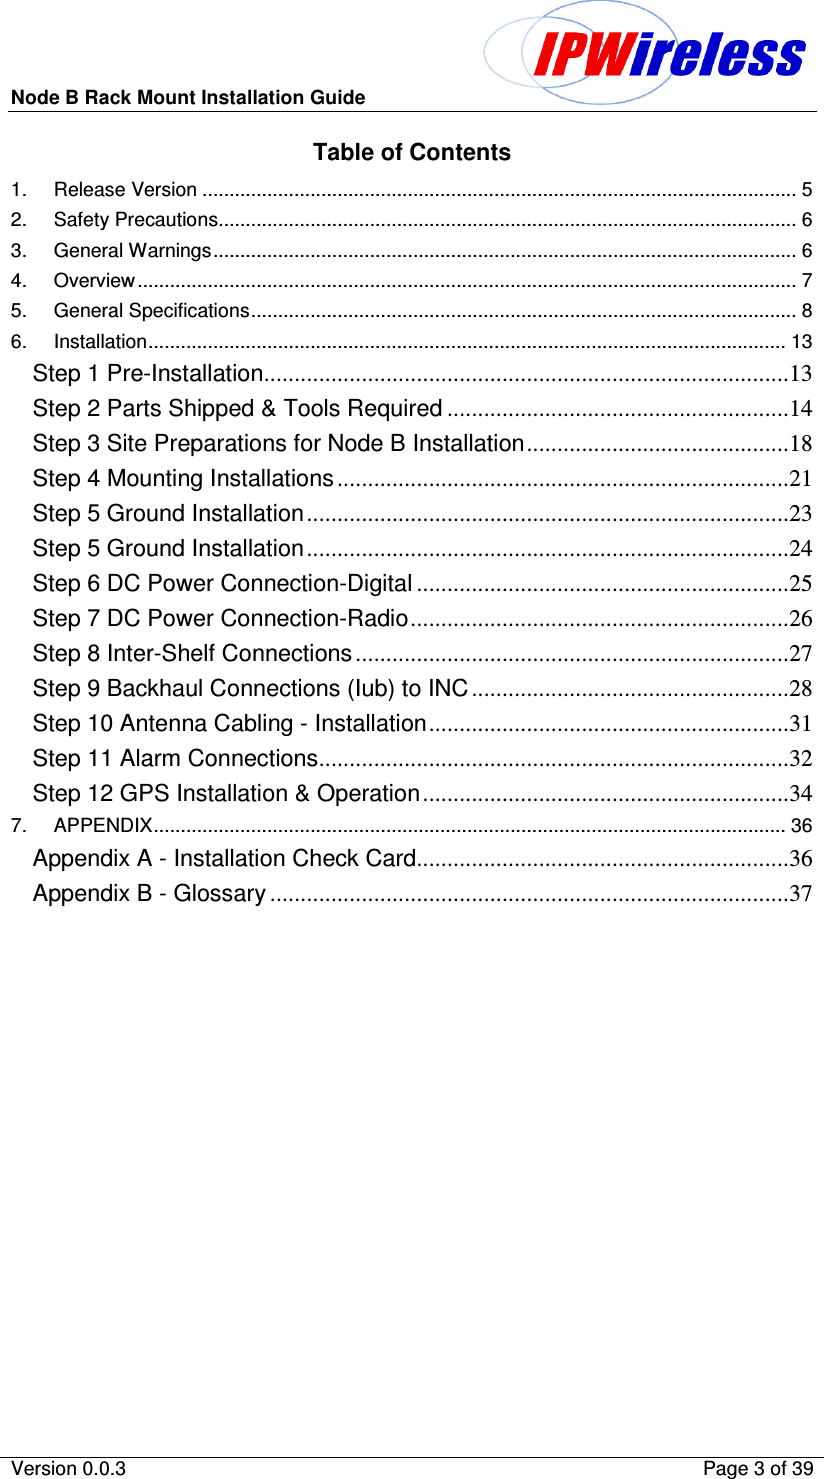 Node B Rack Mount Installation Guide                          Version 0.0.3    Page 3 of 39  Table of Contents 1. Release Version .............................................................................................................. 5 2. Safety Precautions........................................................................................................... 6 3. General Warnings............................................................................................................ 6 4. Overview.......................................................................................................................... 7 5. General Specifications..................................................................................................... 8 6. Installation...................................................................................................................... 13 Step 1 Pre-Installation......................................................................................13 Step 2 Parts Shipped &amp; Tools Required ........................................................14 Step 3 Site Preparations for Node B Installation...........................................18 Step 4 Mounting Installations..........................................................................21 Step 5 Ground Installation...............................................................................23 Step 5 Ground Installation...............................................................................24 Step 6 DC Power Connection-Digital .............................................................25 Step 7 DC Power Connection-Radio..............................................................26 Step 8 Inter-Shelf Connections.......................................................................27 Step 9 Backhaul Connections (Iub) to INC....................................................28 Step 10 Antenna Cabling - Installation...........................................................31 Step 11 Alarm Connections.............................................................................32 Step 12 GPS Installation &amp; Operation............................................................34 7. APPENDIX..................................................................................................................... 36 Appendix A - Installation Check Card.............................................................36 Appendix B - Glossary .....................................................................................37  